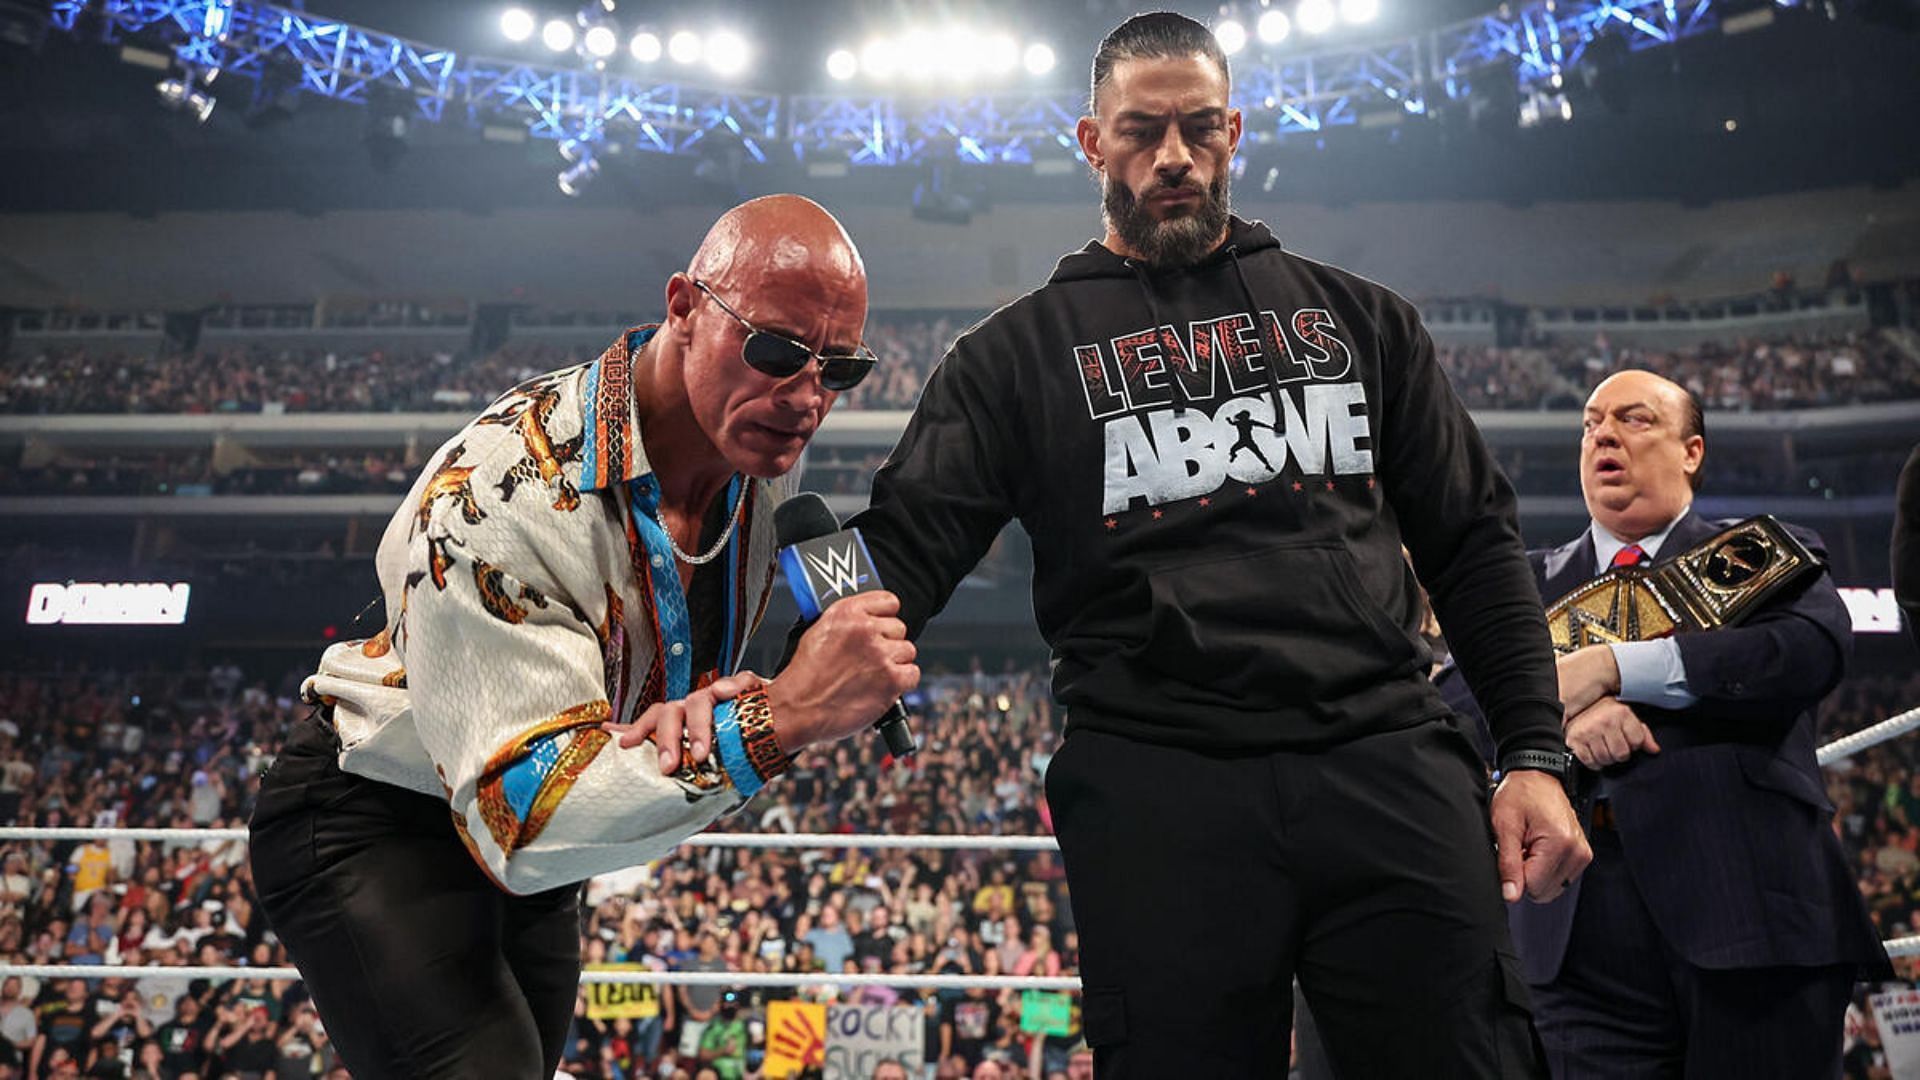 Roman Reigns and The Rock are stablemates in The Bloodline